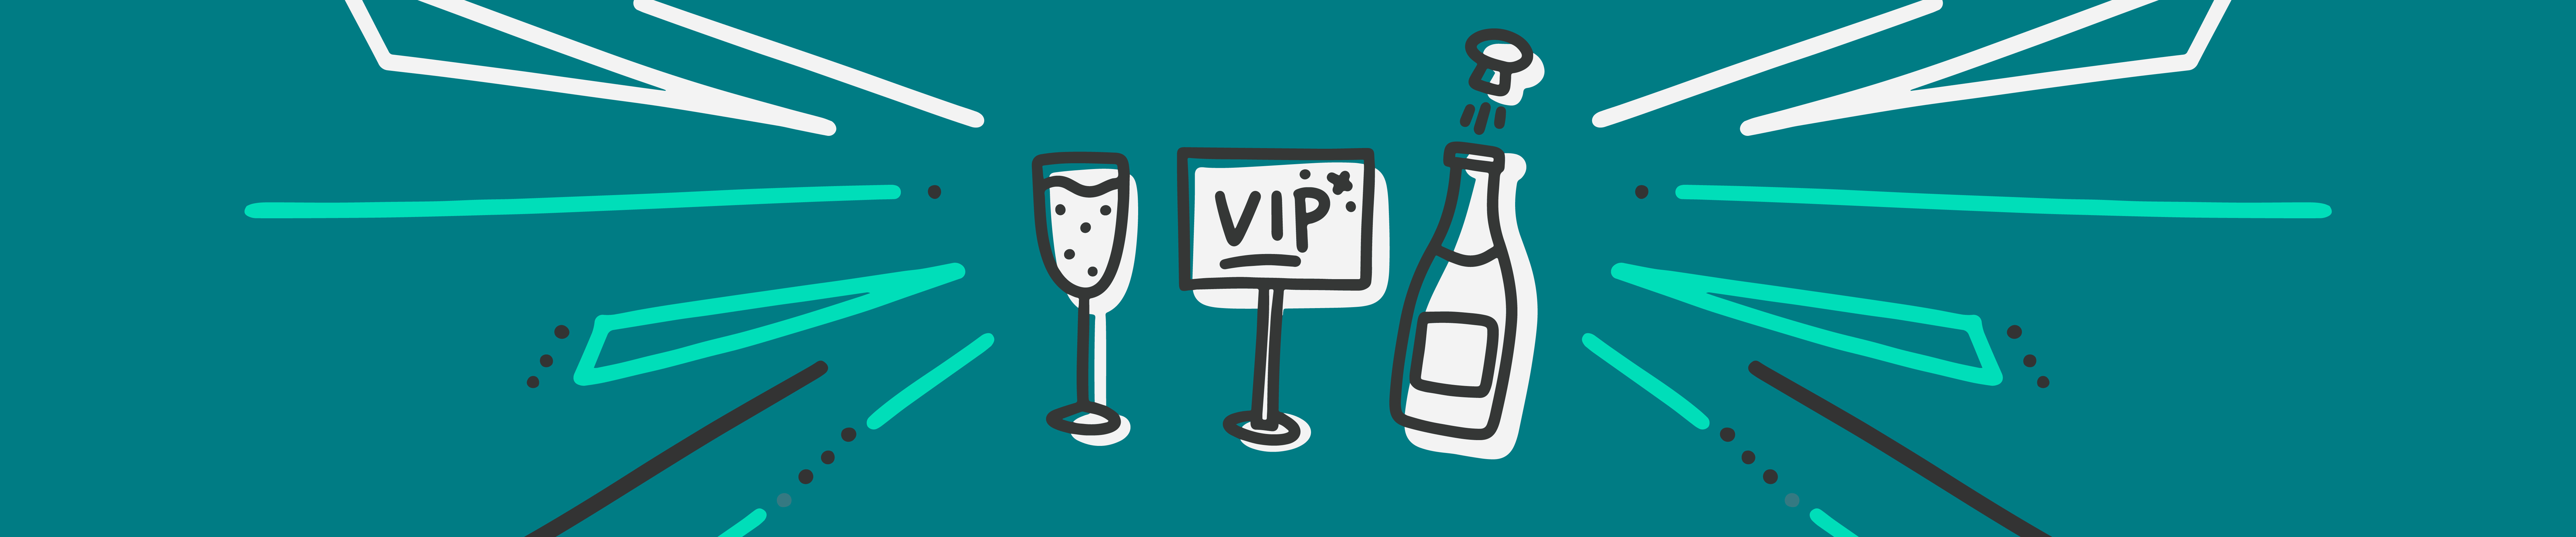 Champagne bottle, bubbling champagne flutes and VIP sign